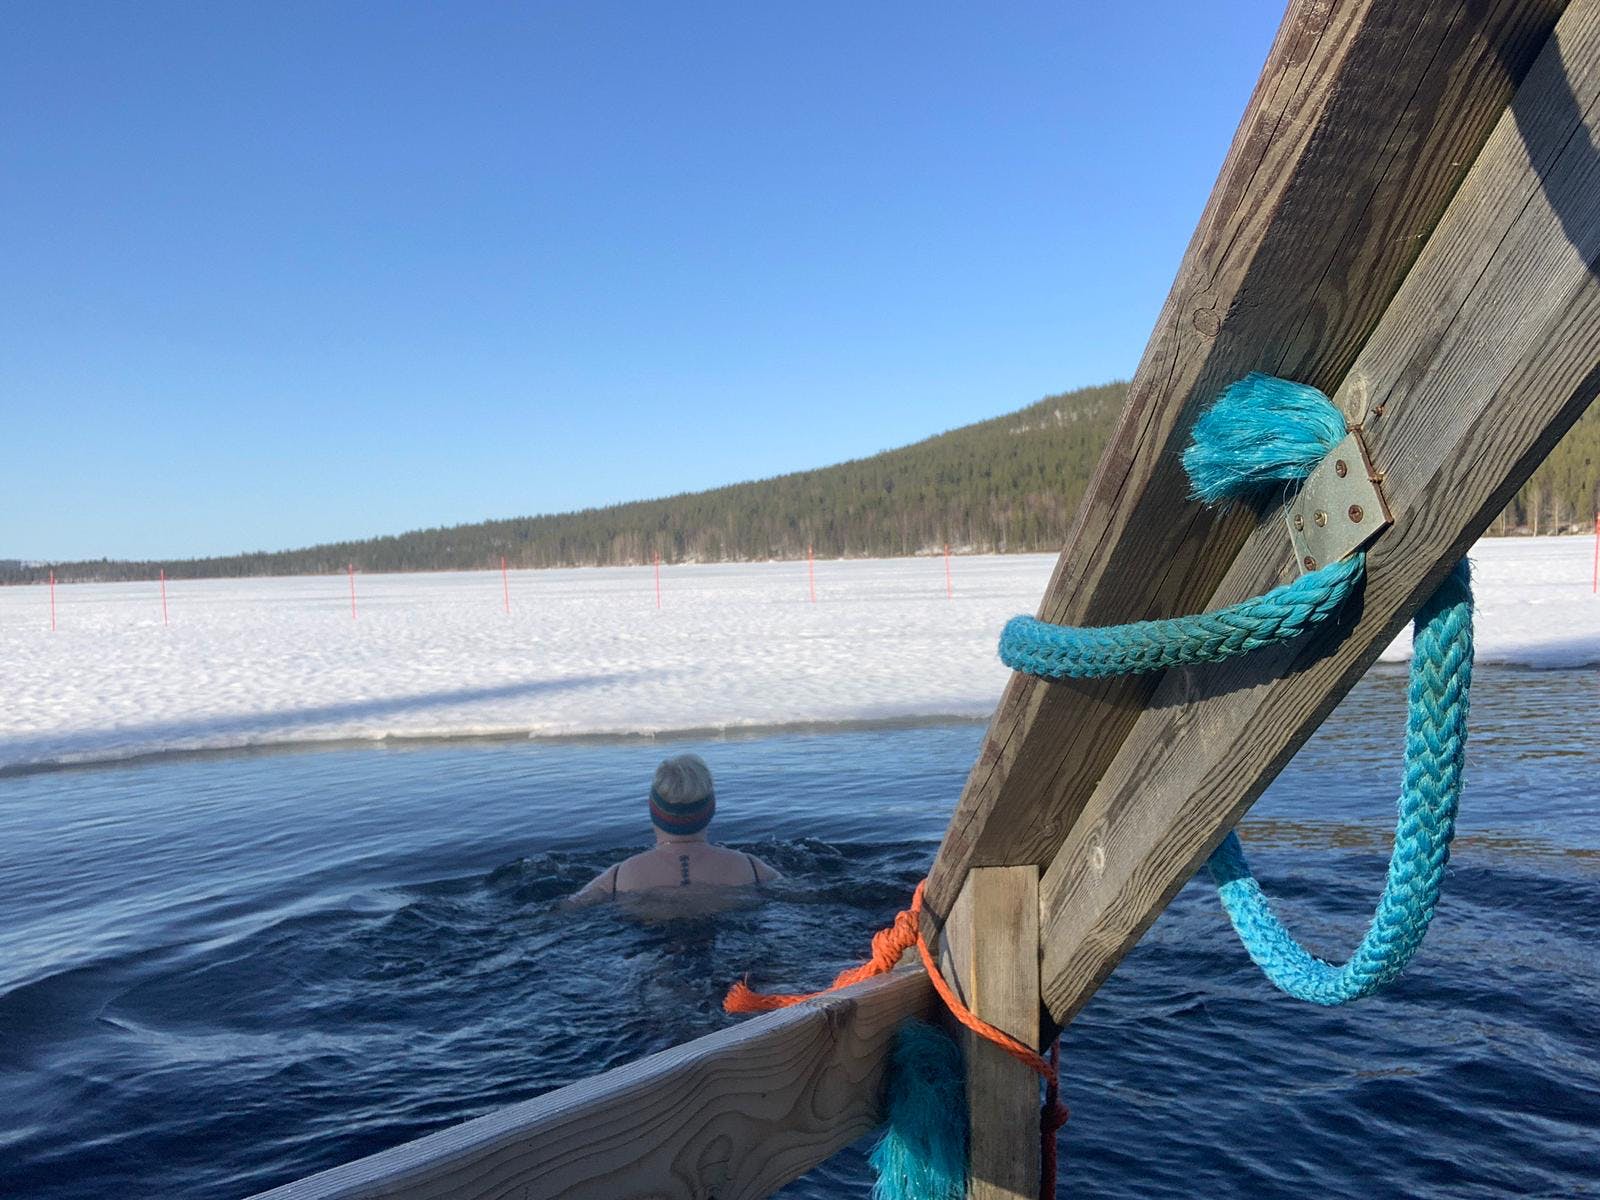 A swimmer plunges into an icy swimming hole in Finland.